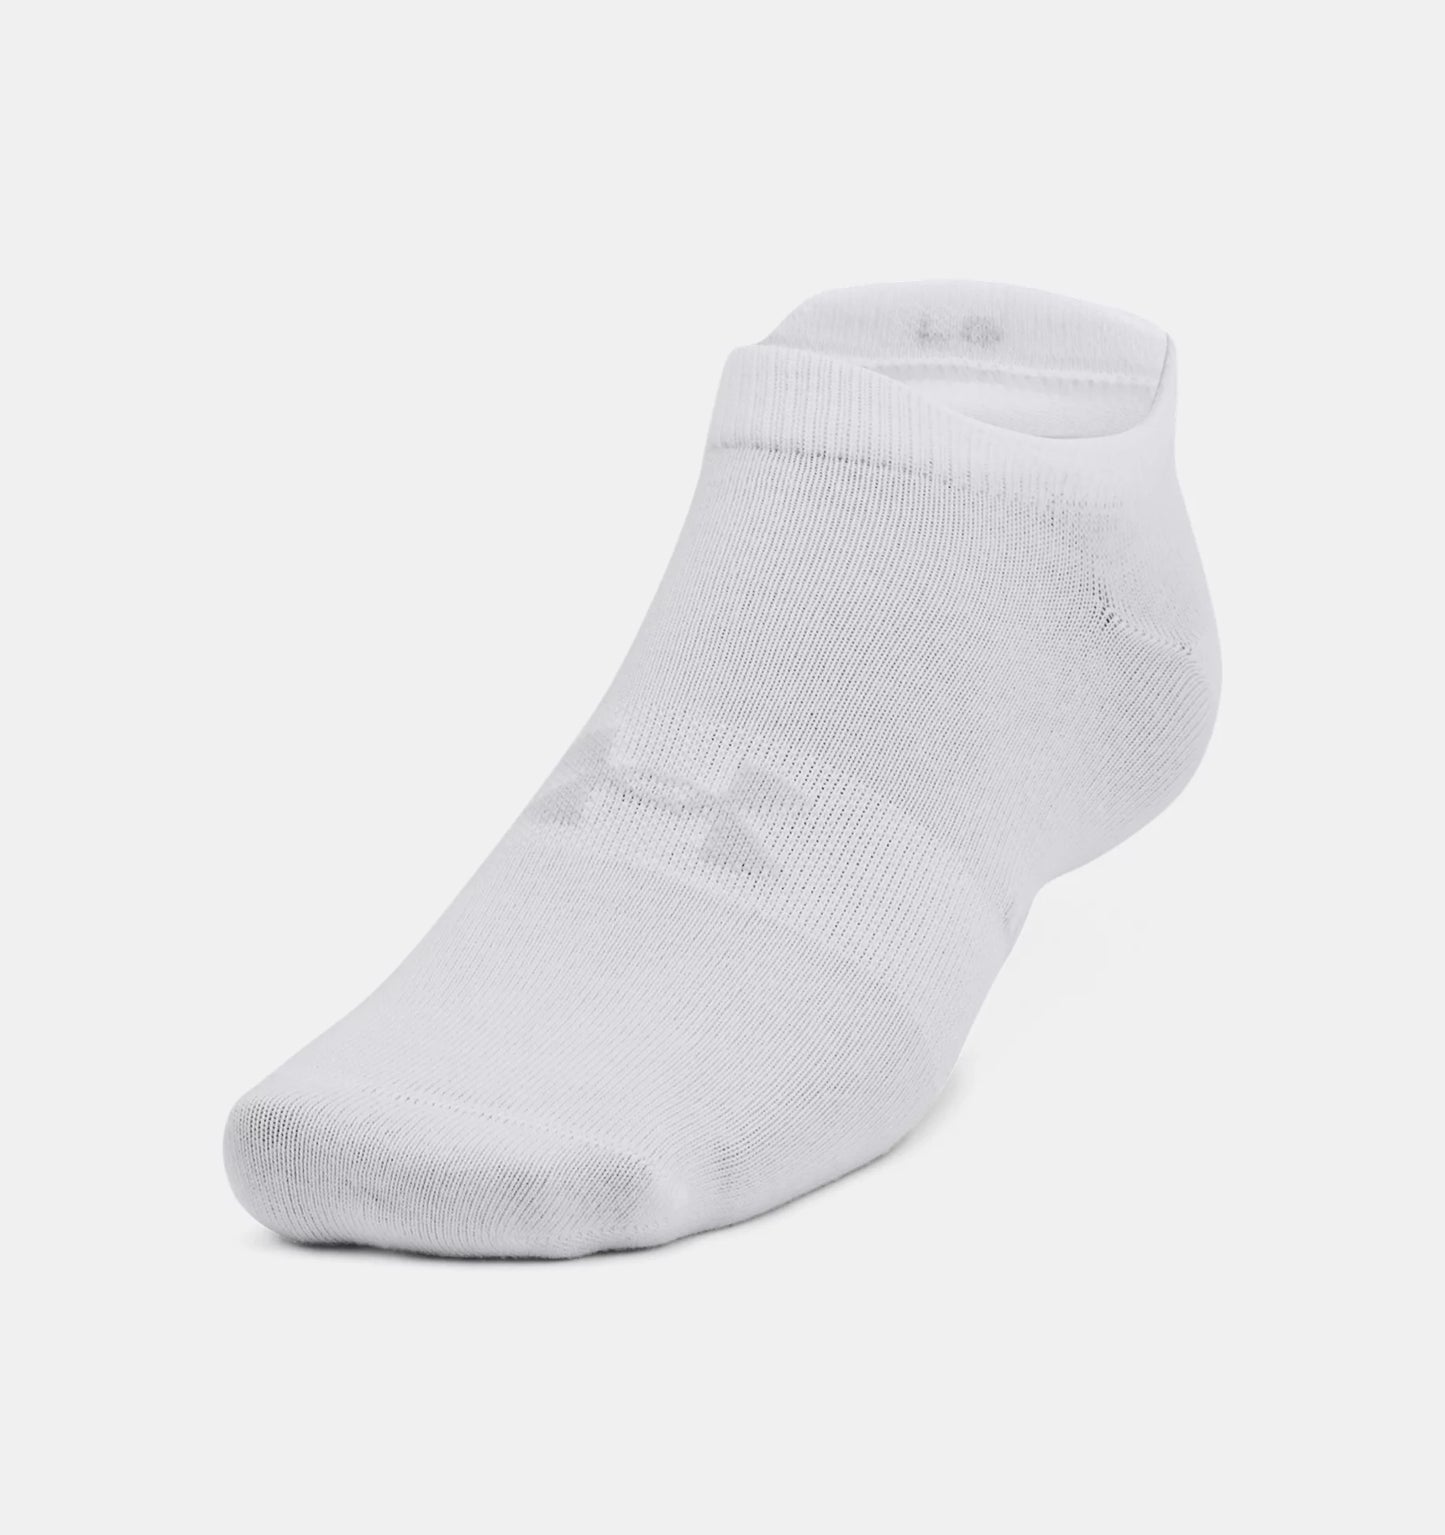 UAA-P5 (Unisex essential no show 6 pack white/heather gray) 32291739